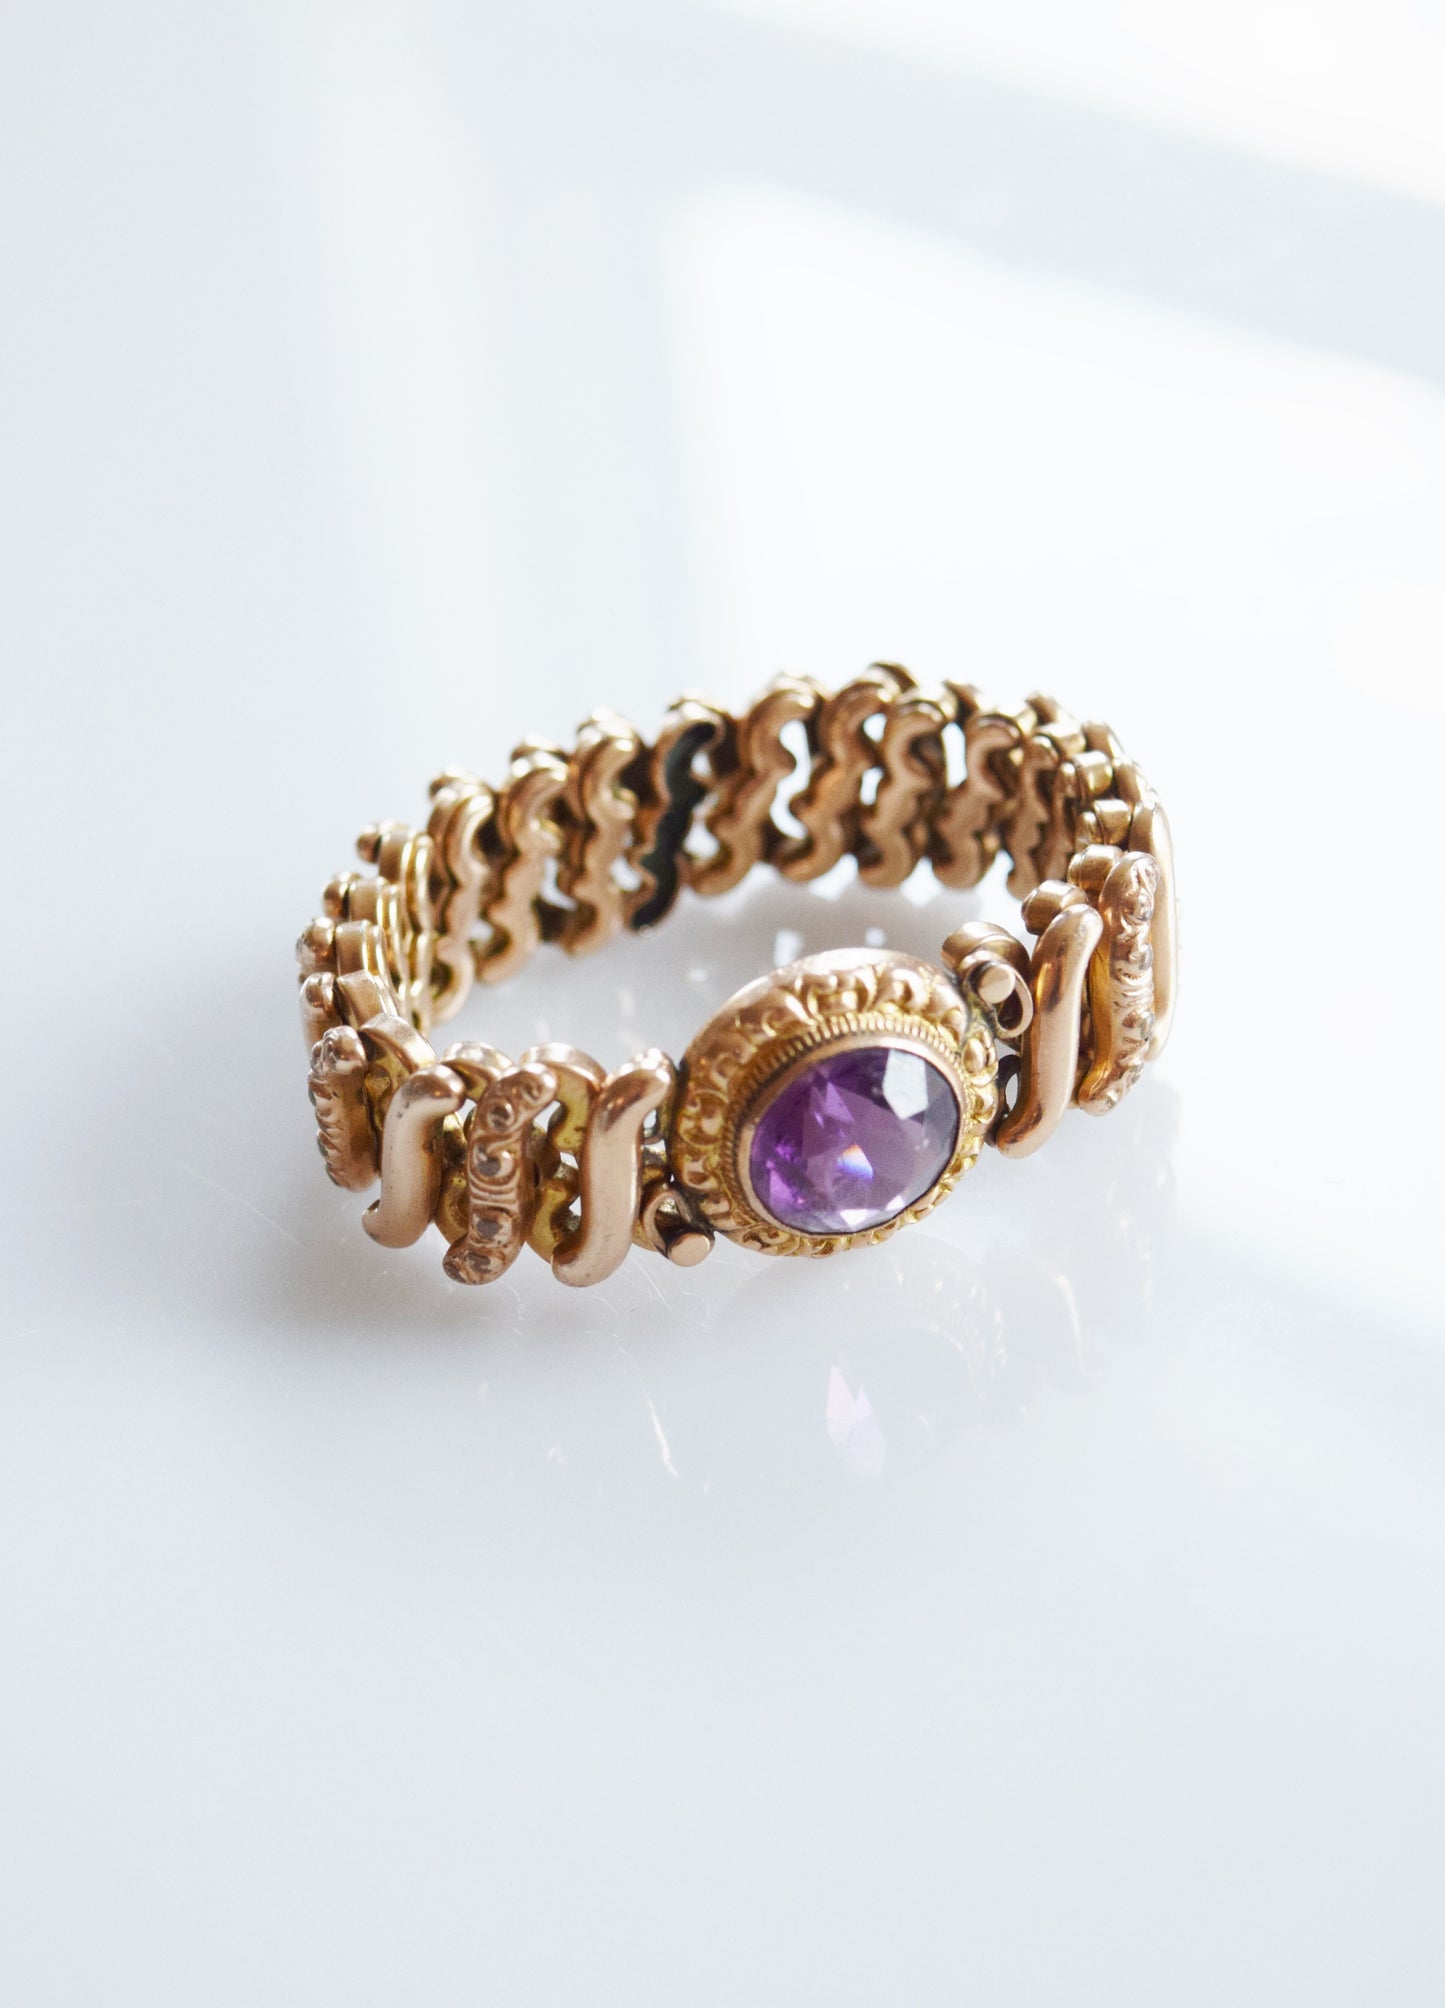 Victorian Revival Sweetheart Expansion Bracelet with Amethyst Stone | 1940s